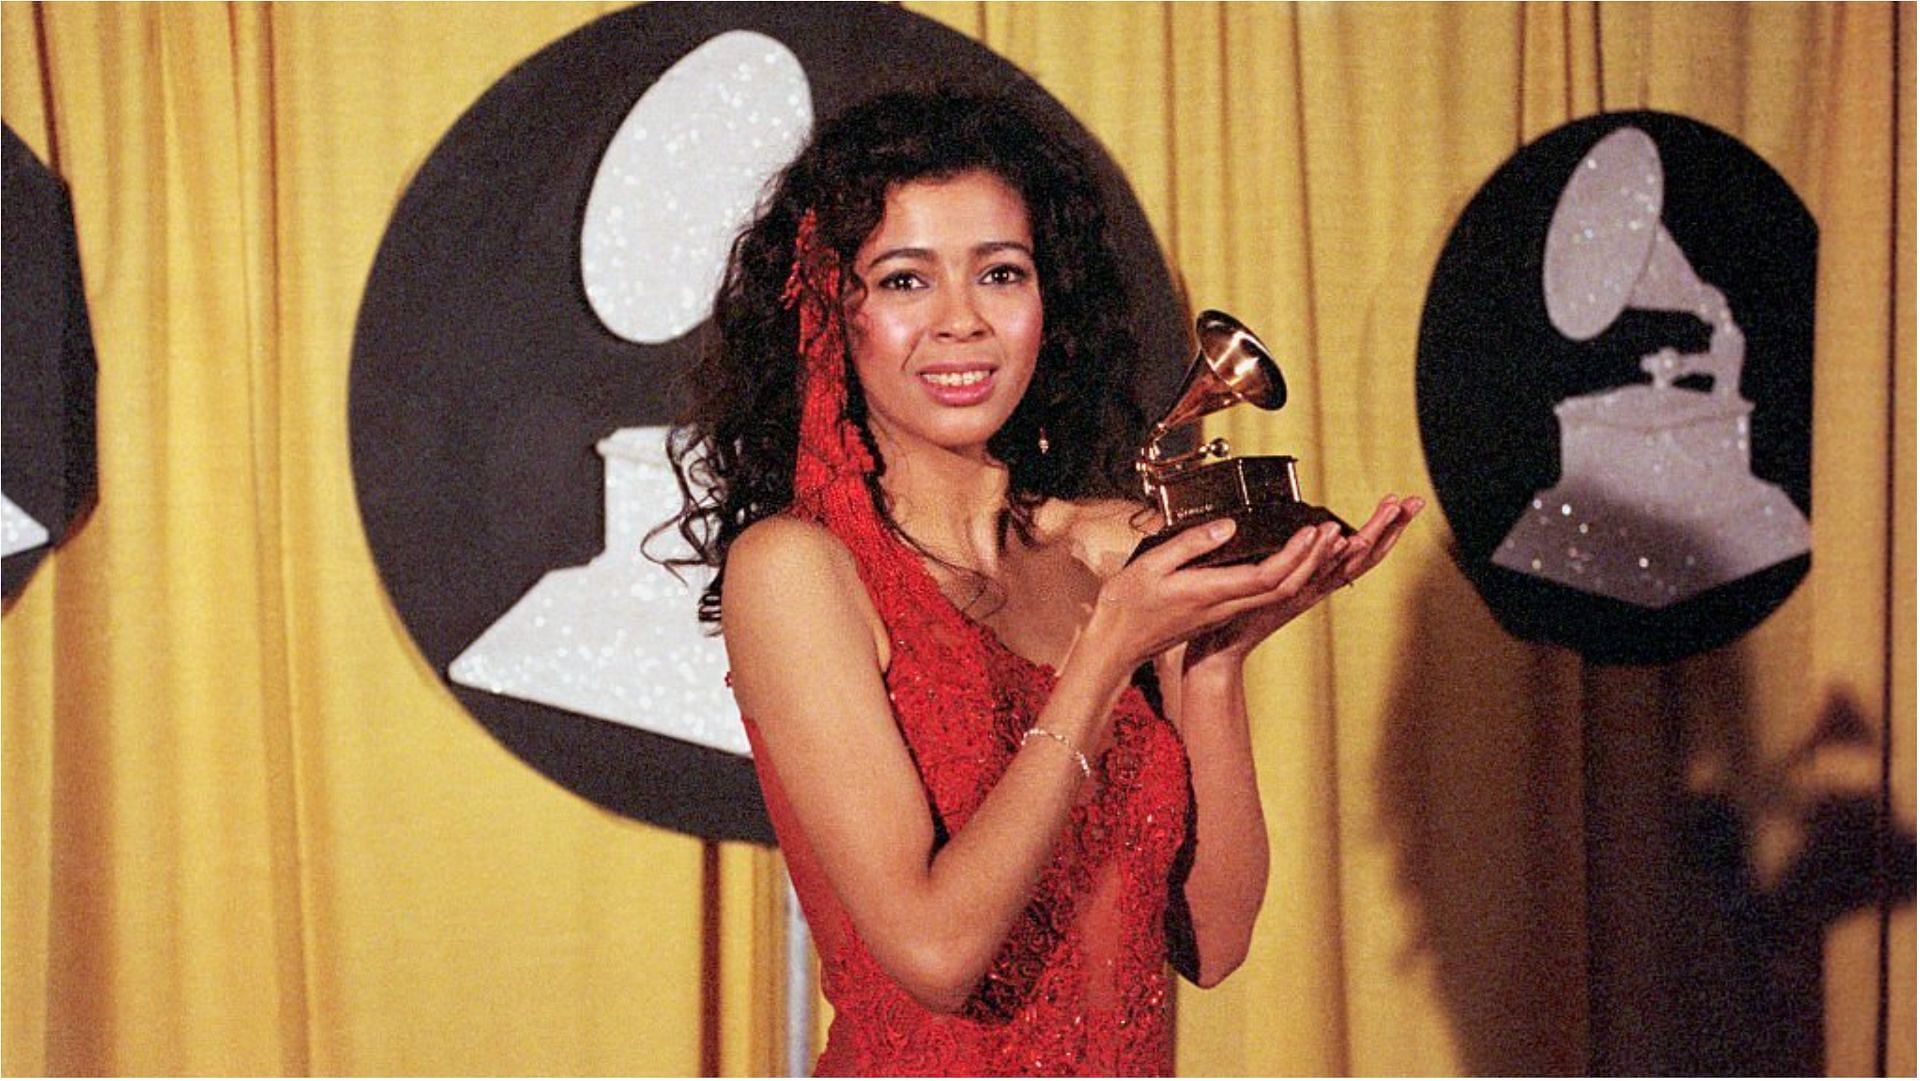 Irene Cara was known as a popular singer and actress (Image via Getty Images)